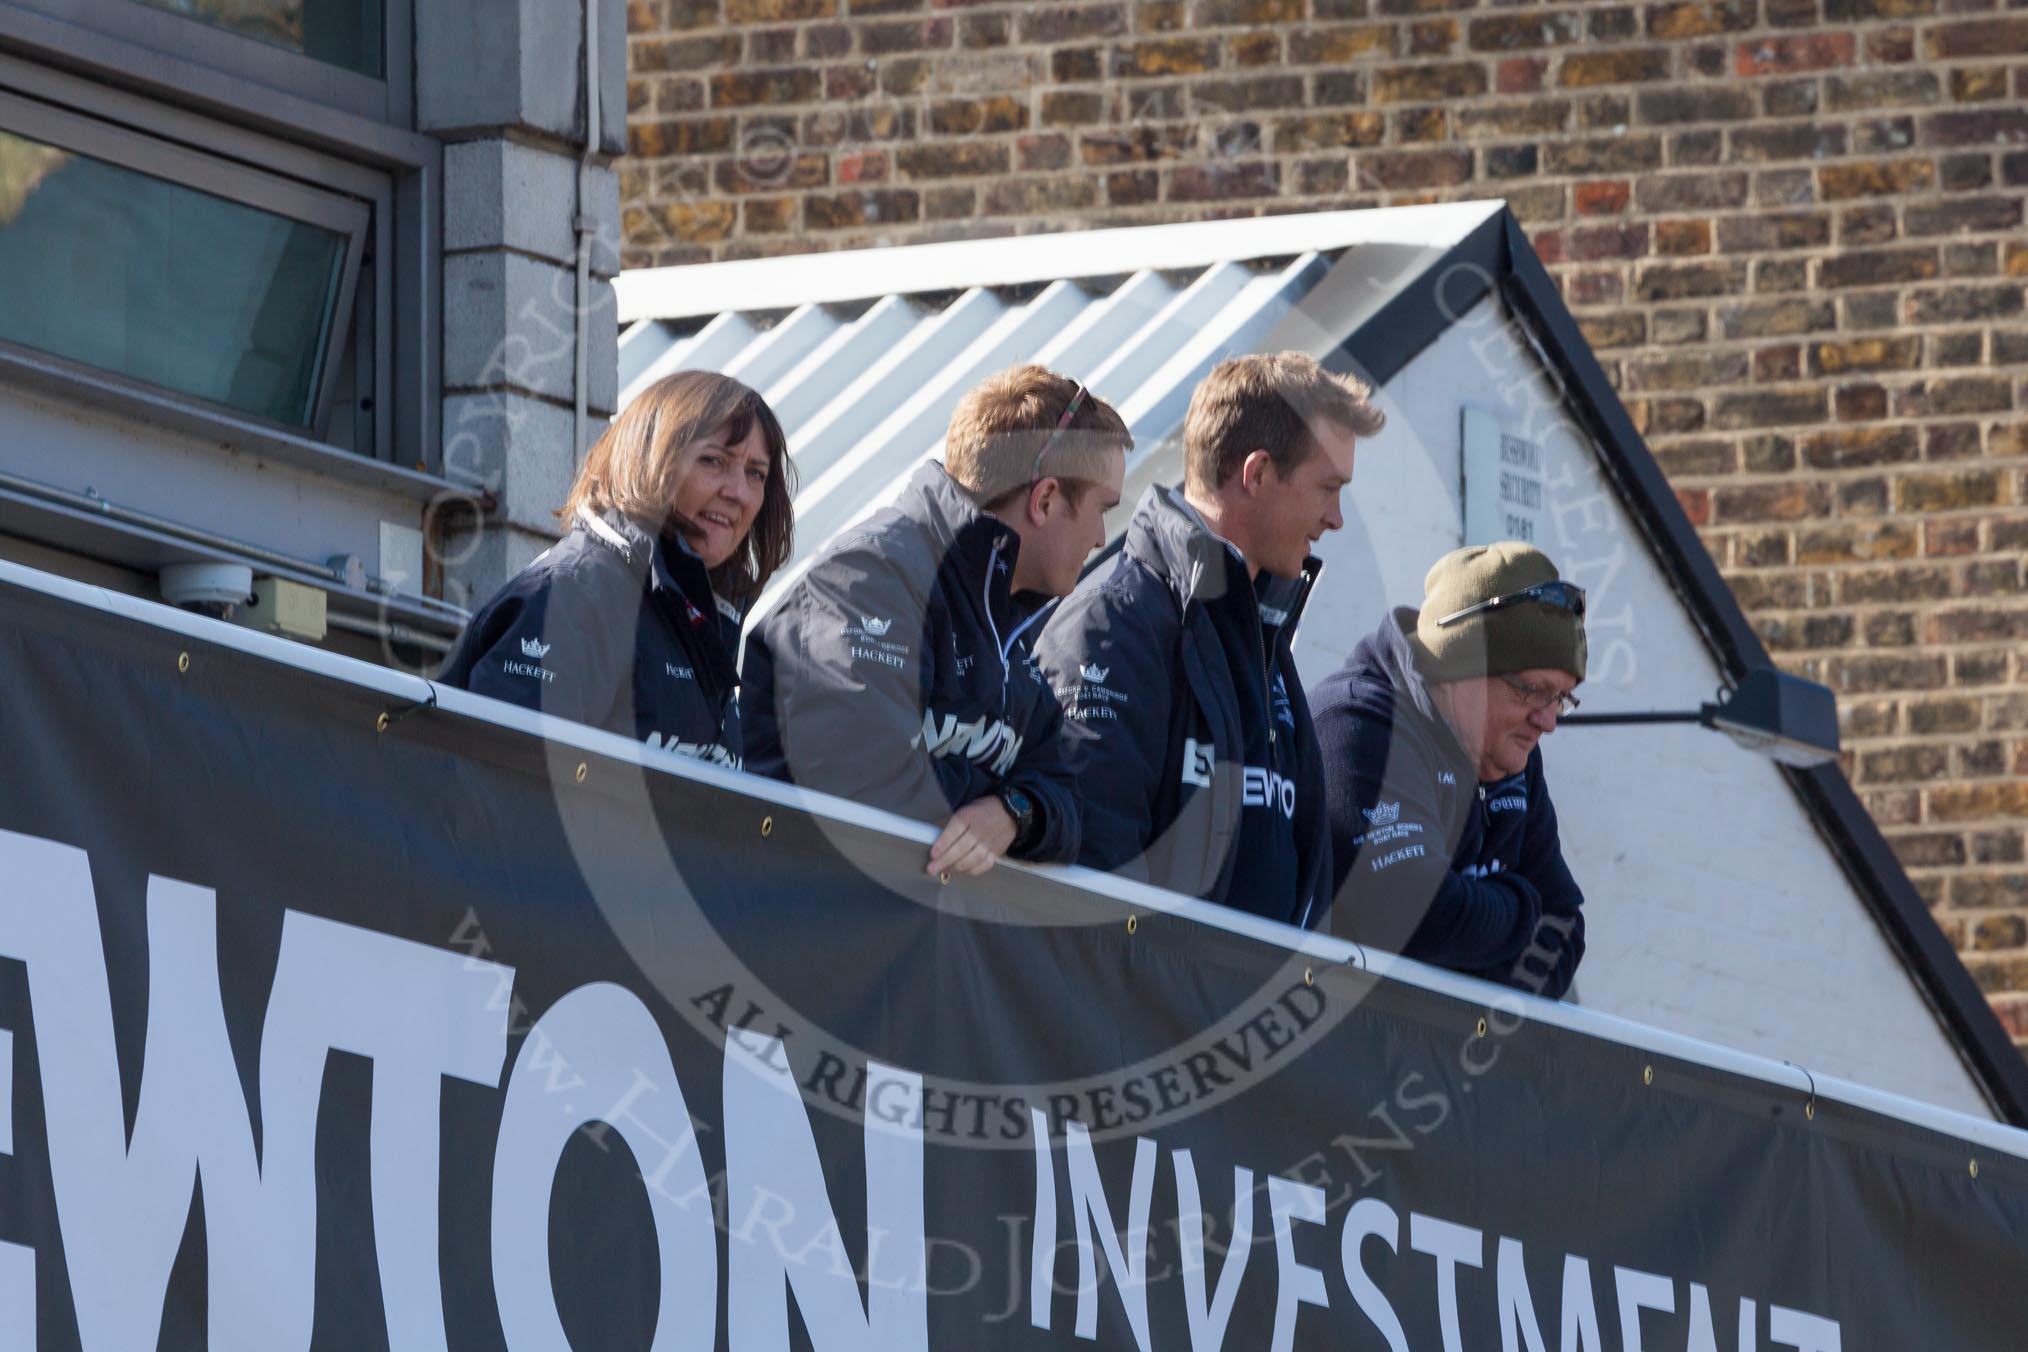 The Boat Race season 2015 - Newton Women's Boat Race.
River Thames between Putney and Mortlake,
London,

United Kingdom,
on 11 April 2015 at 15:32, image #58